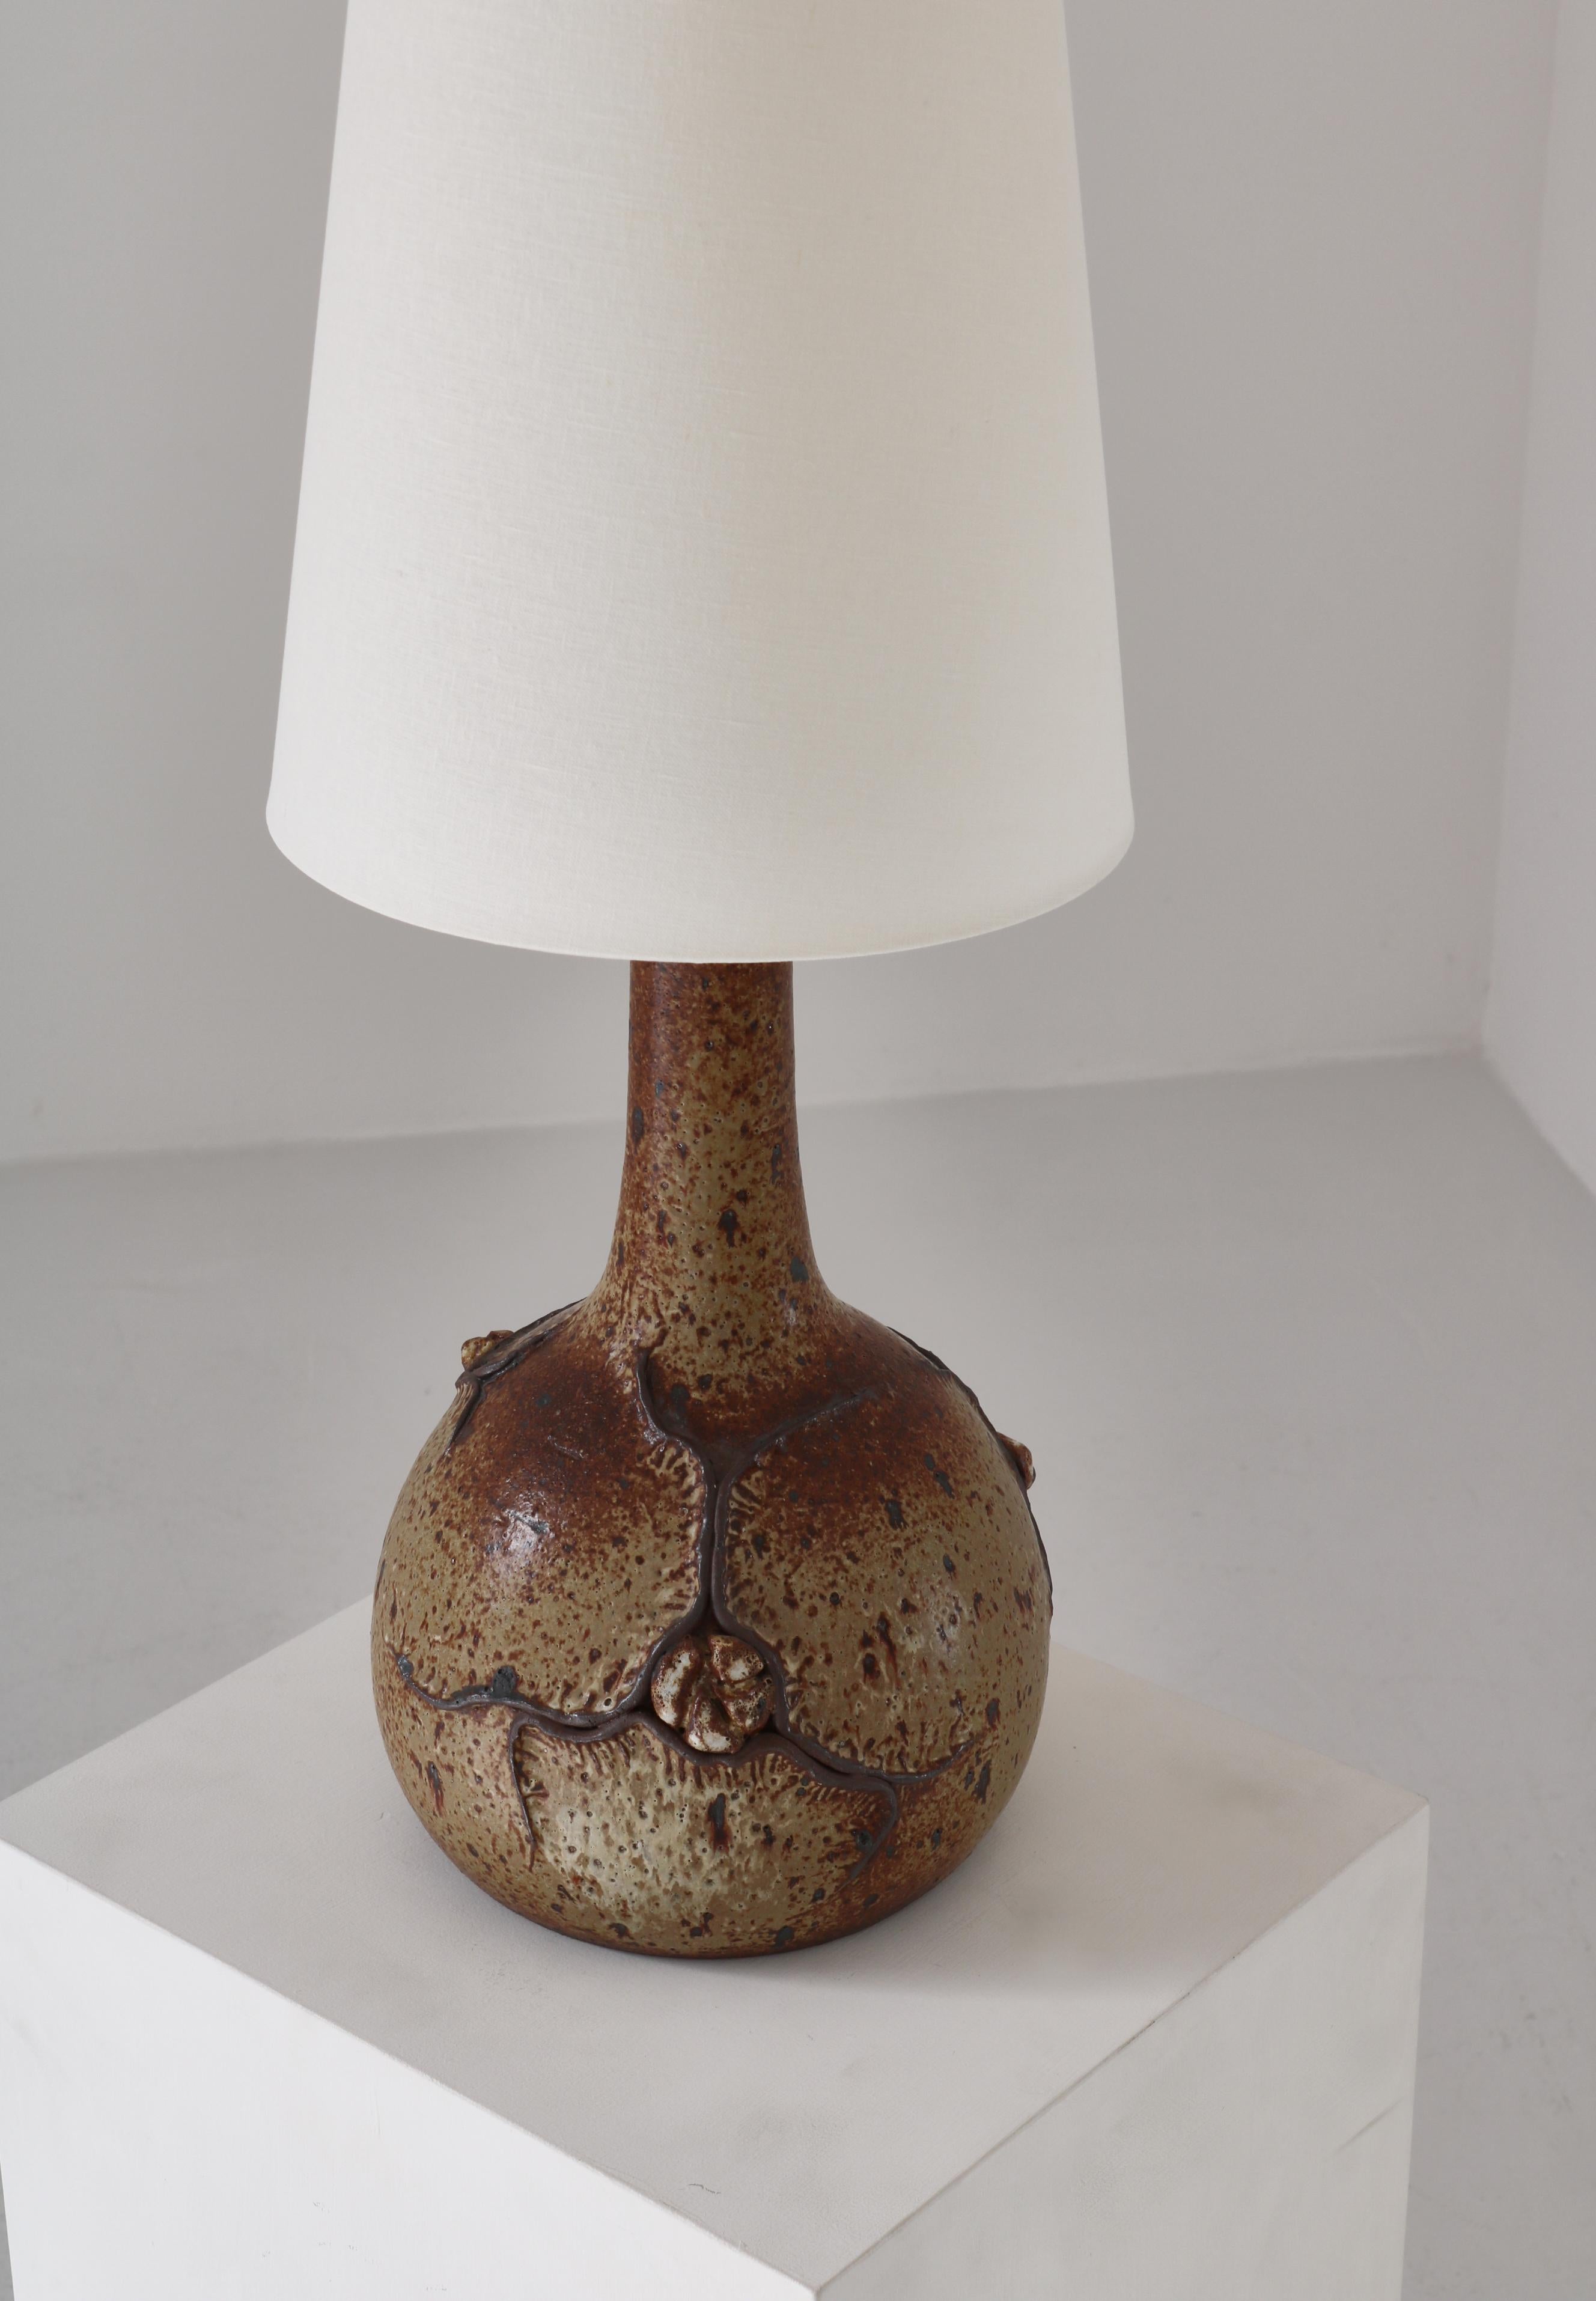 Large Danish Modern Ceramic Floor Lamp by Still Keramik Earth Color's, 1960s In Good Condition For Sale In Odense, DK